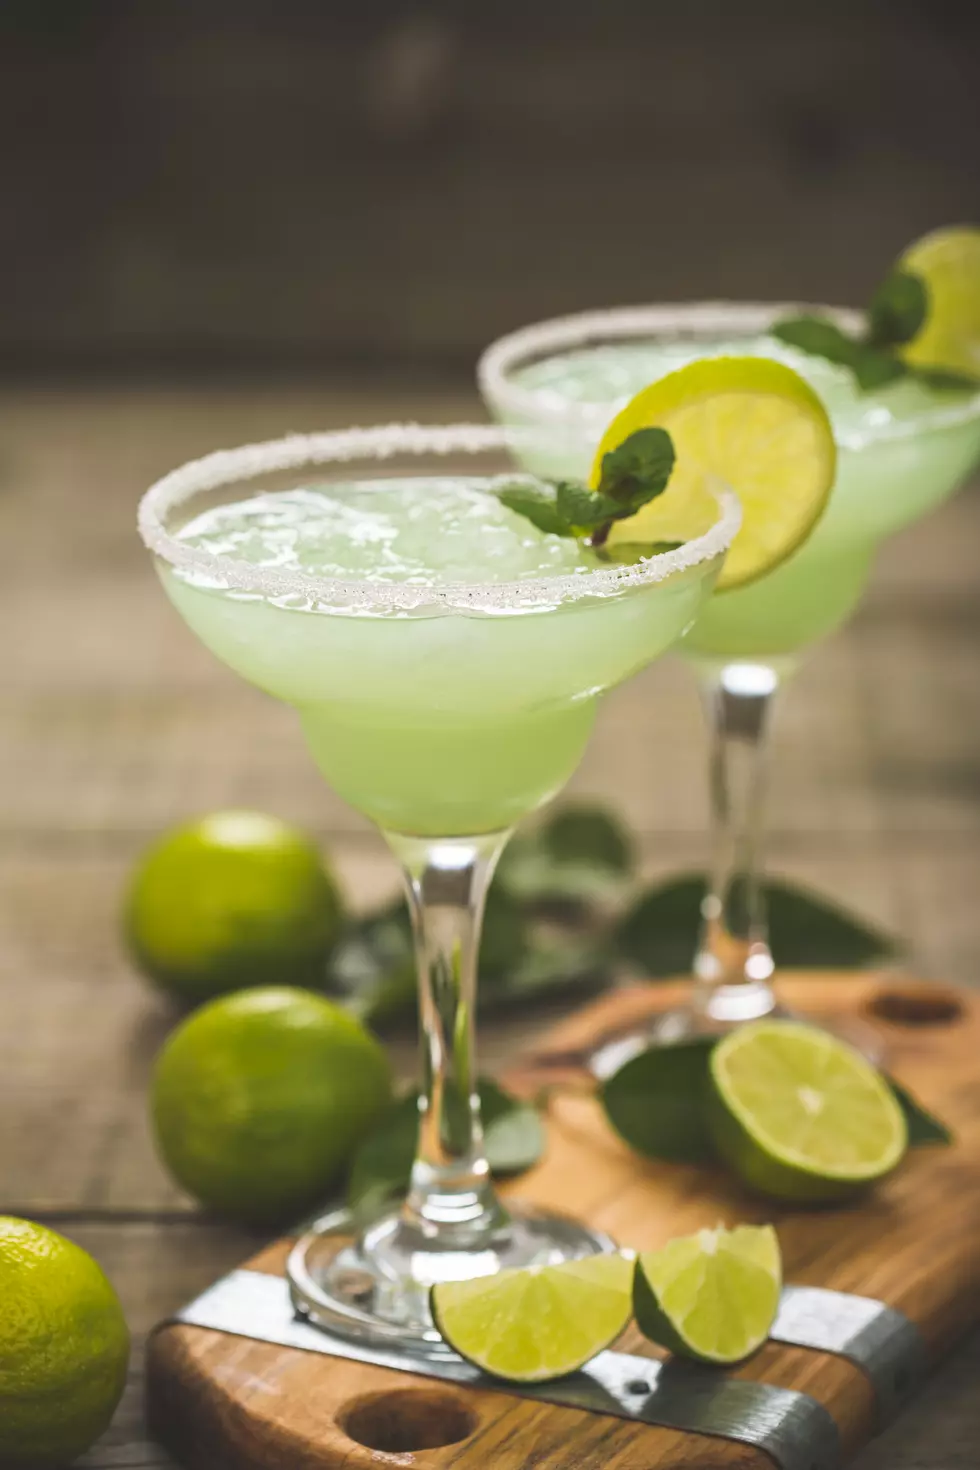 Who Has The Best Margarita In Twin Falls?